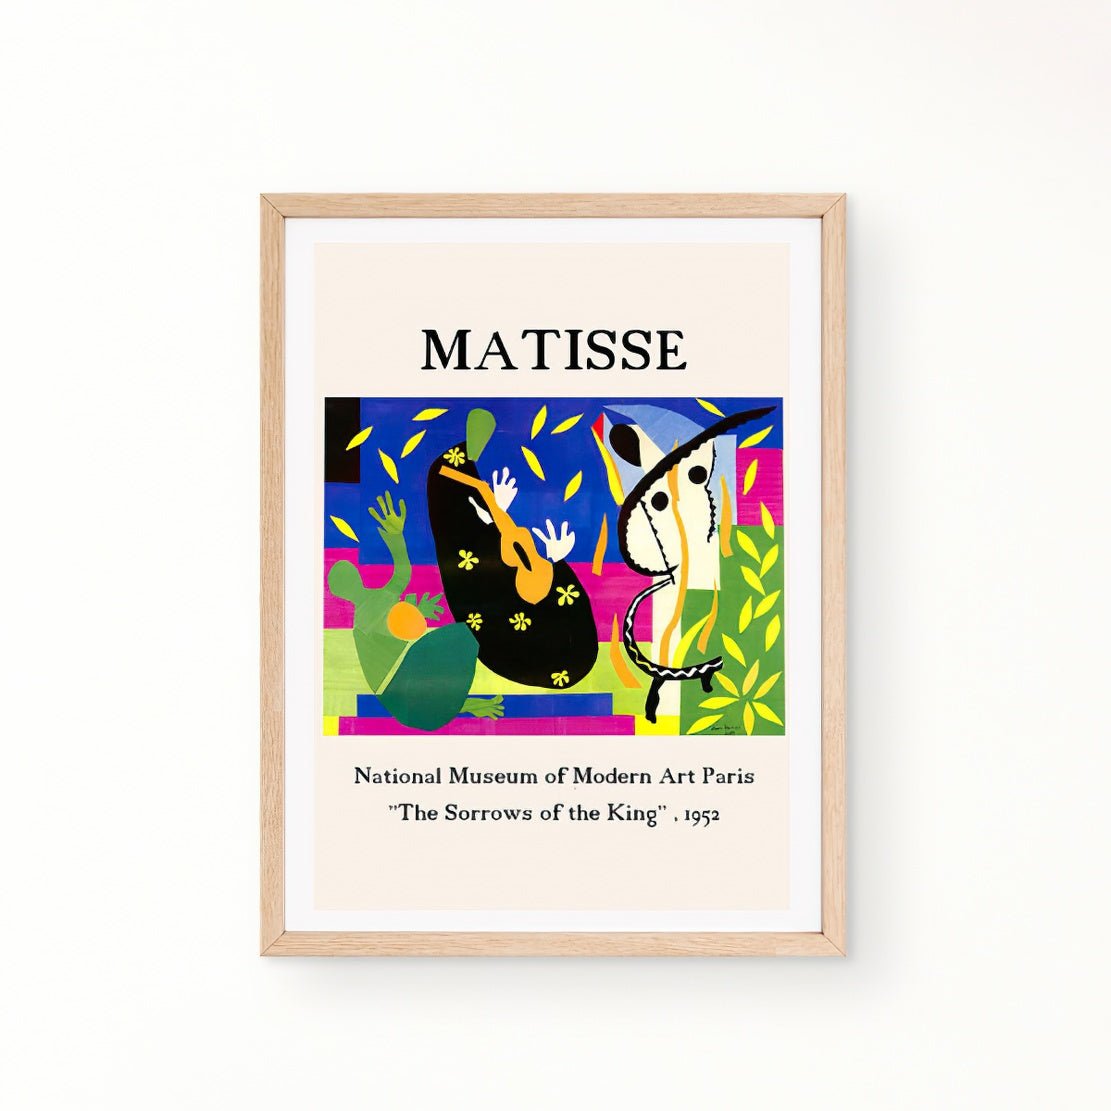 Henri Matisse "The Sorrows of the King" 1952 art print poster